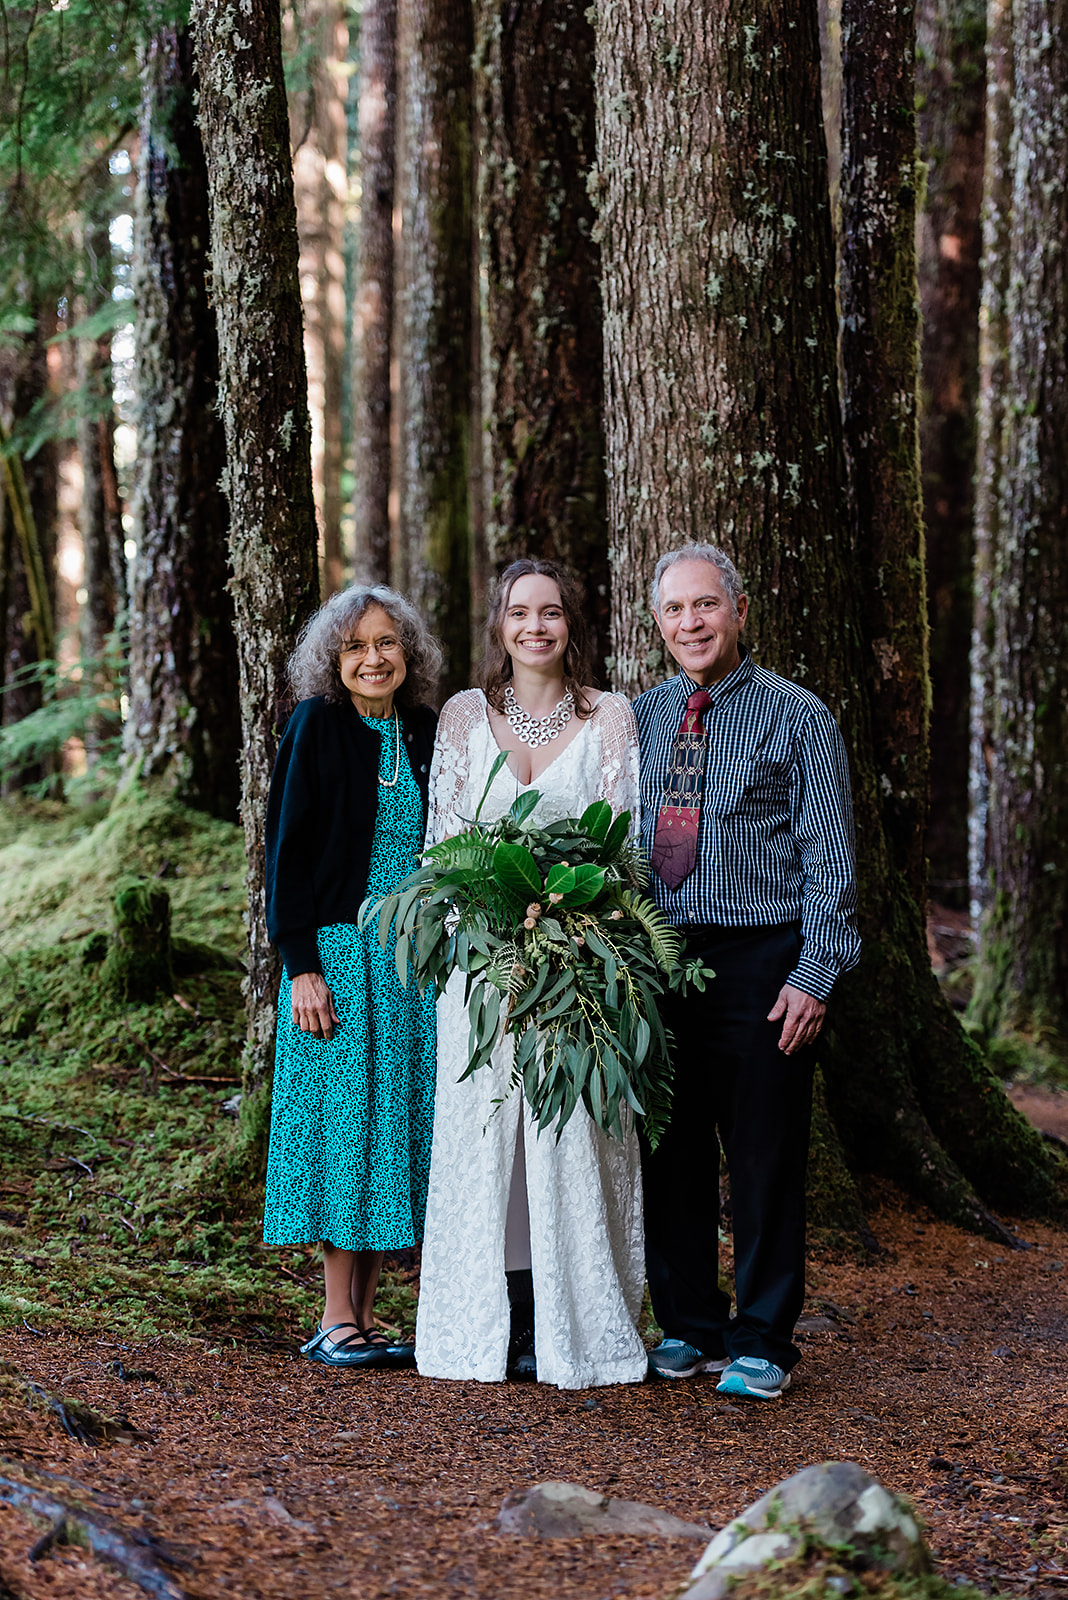 This is a portrait of the bride with loved ones.